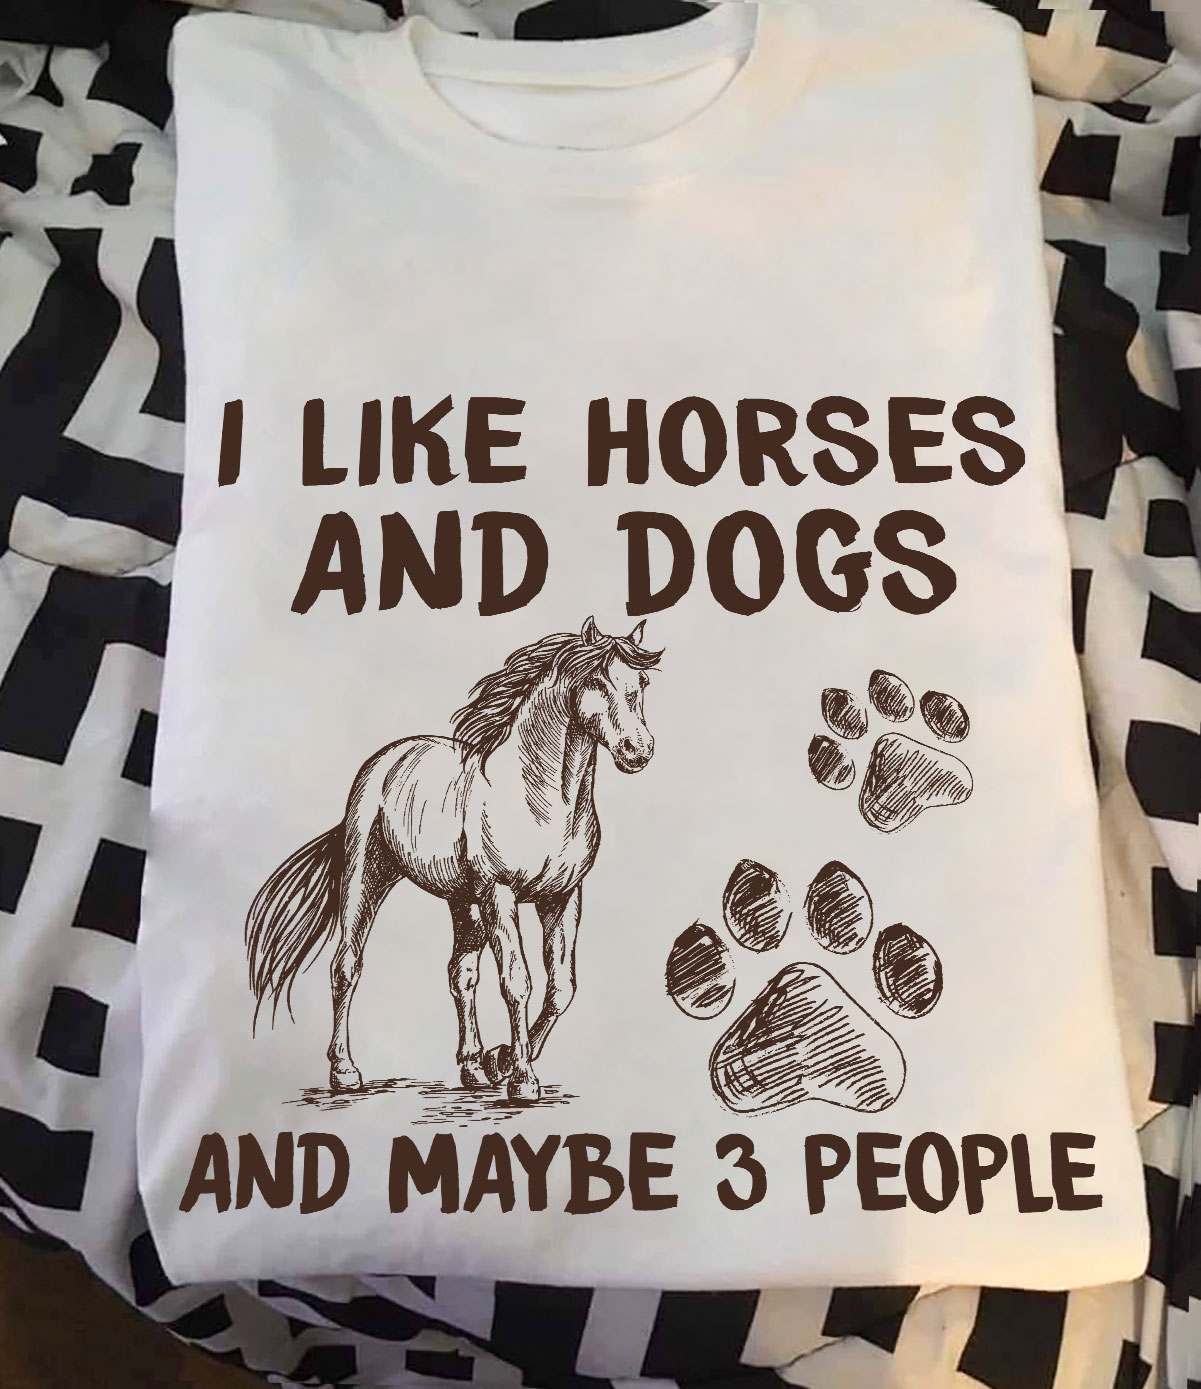 I like dogs and horses and maybe 3 people - Dog paws